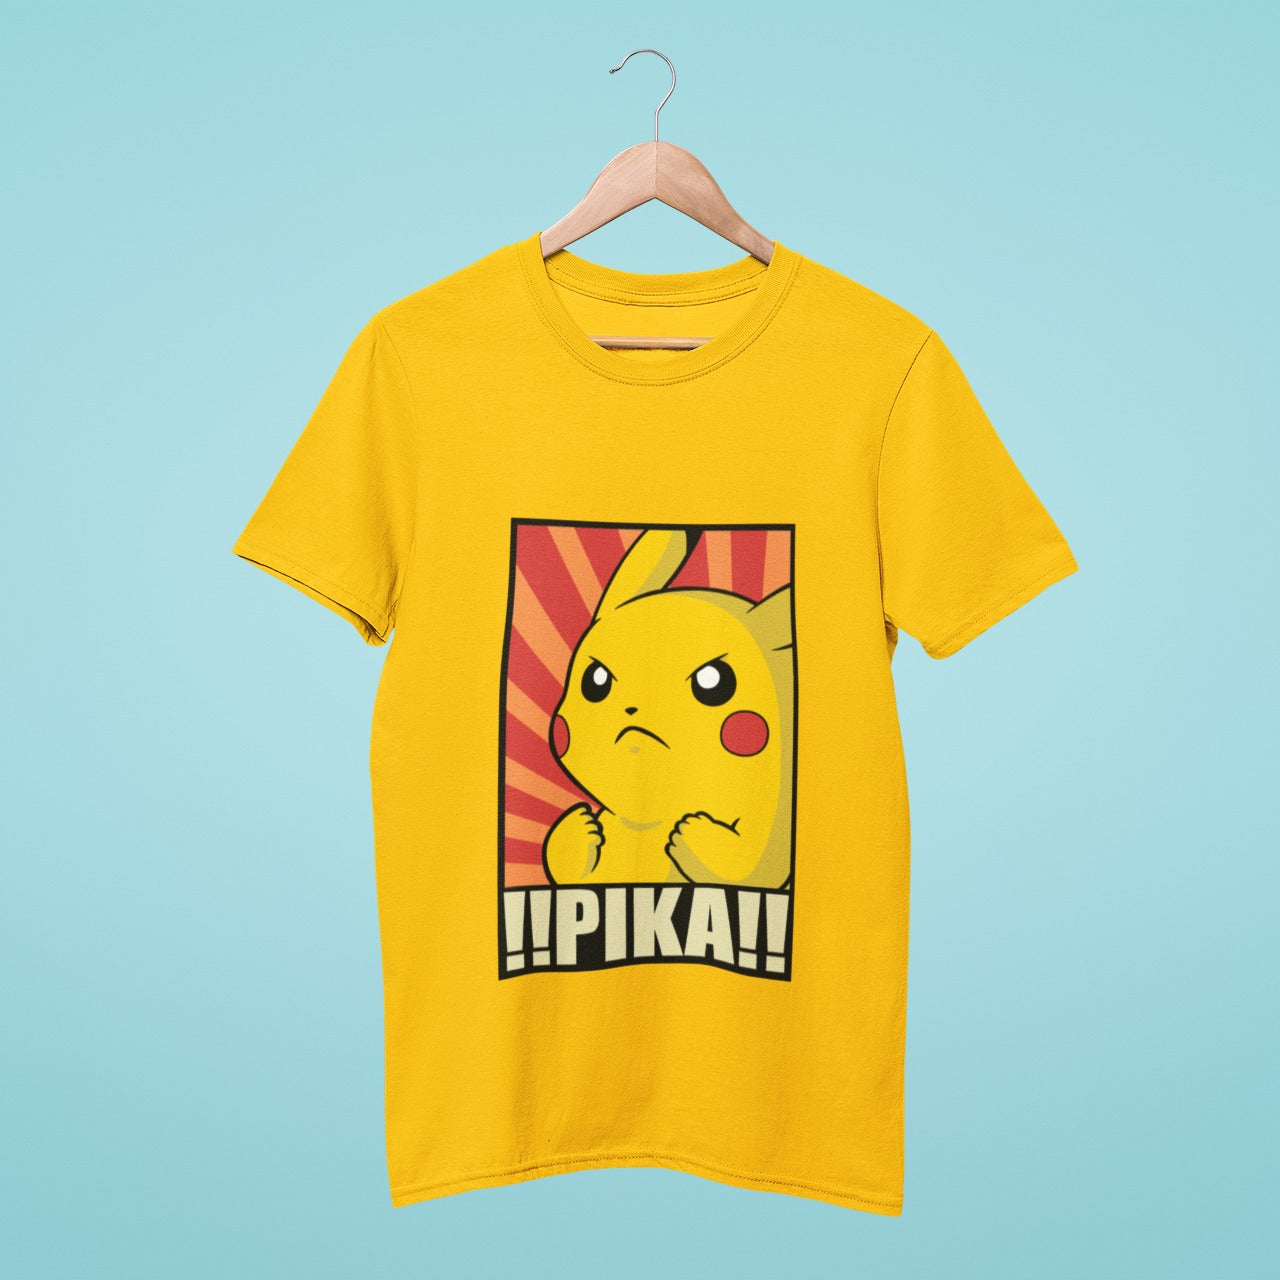 Looking for a fun and stylish addition to your wardrobe? Our yellow t-shirt featuring a determined Pikachu saying "pika" is the perfect fit! Made with high-quality materials and designed for comfort, this shirt is great for any occasion. Get yours today!